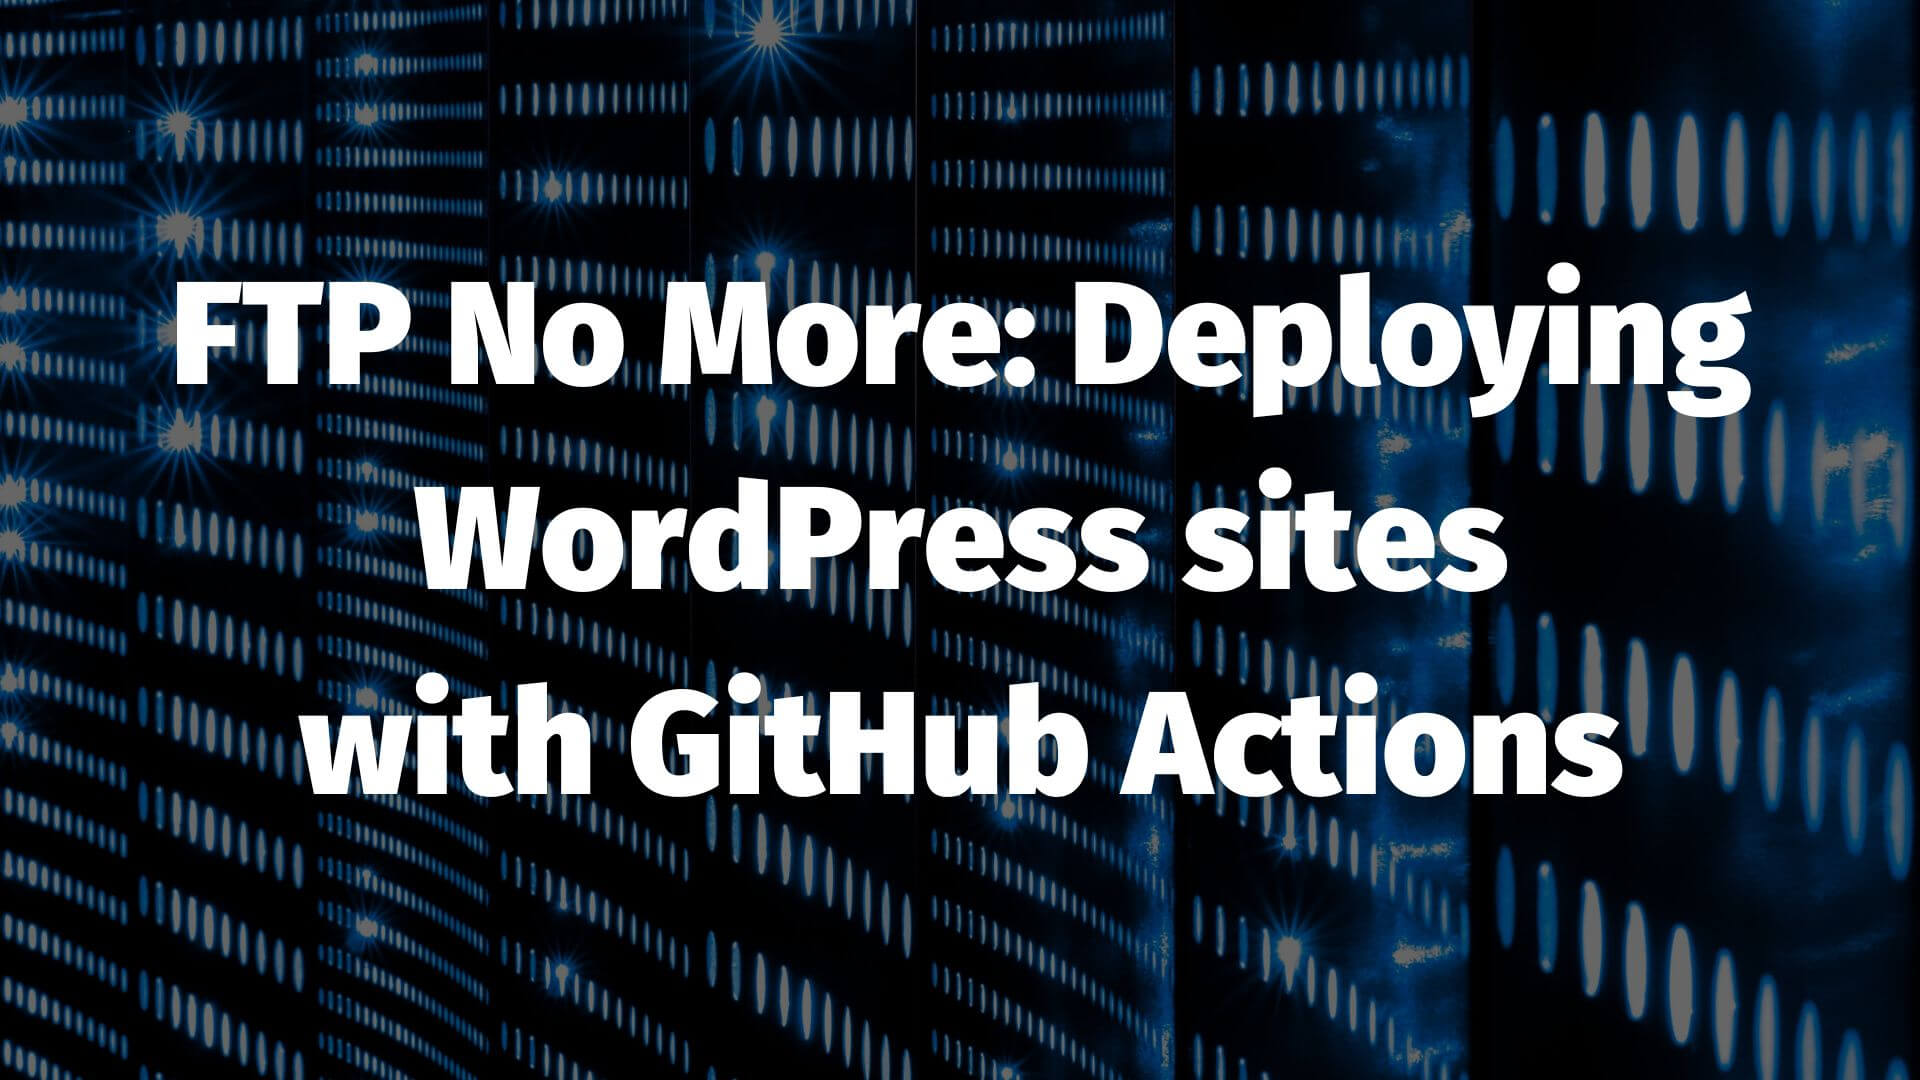 FTP No More: Deploying WordPress sites with GitHub Actions